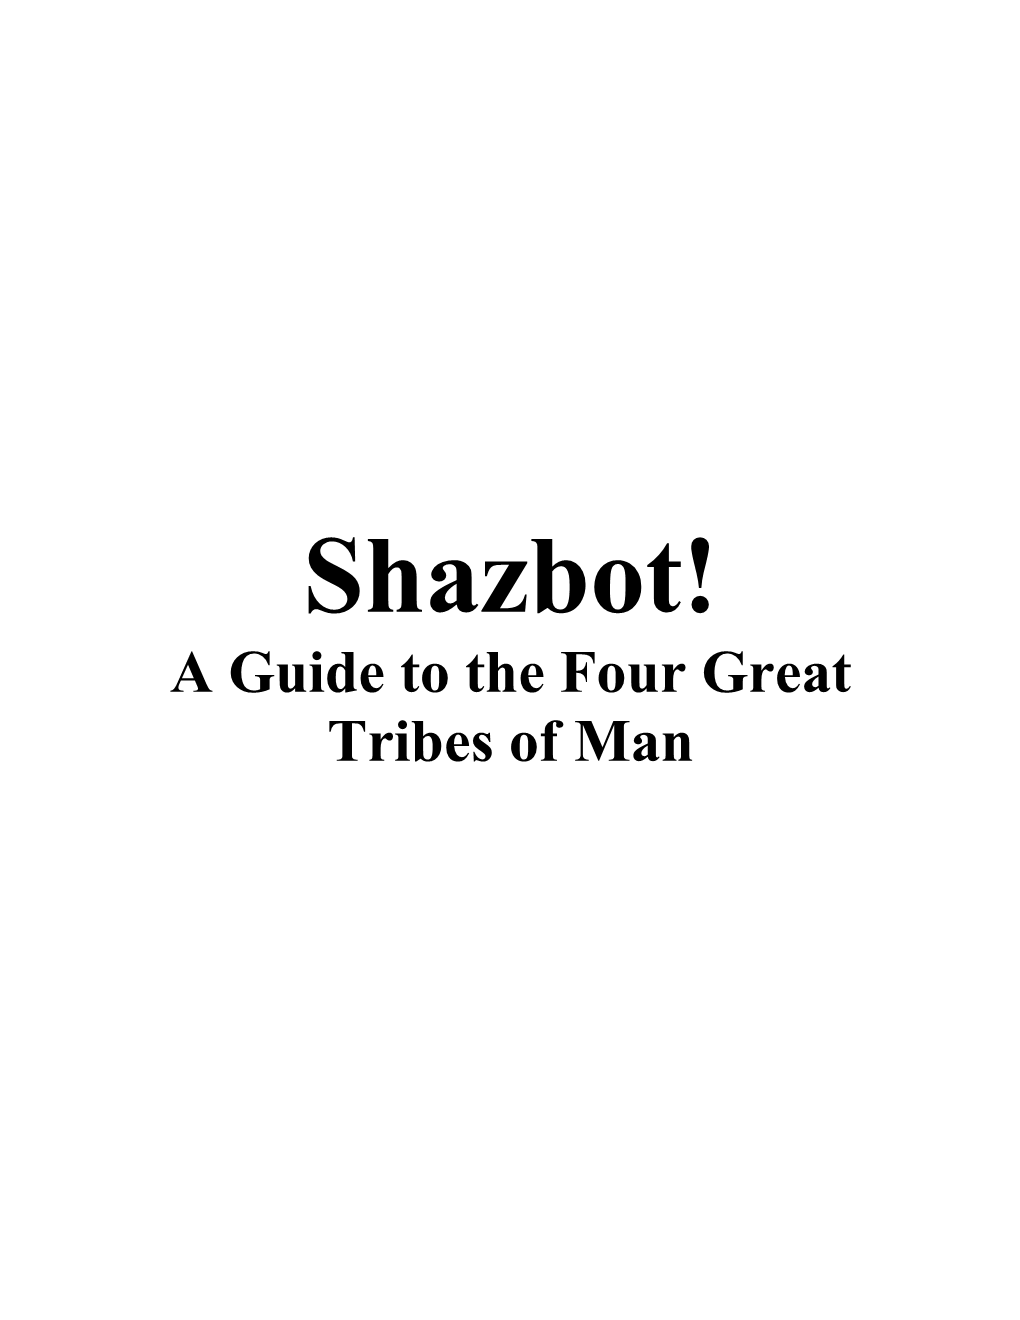 Shazbot! a Guide to the Four Great Tribes of Man